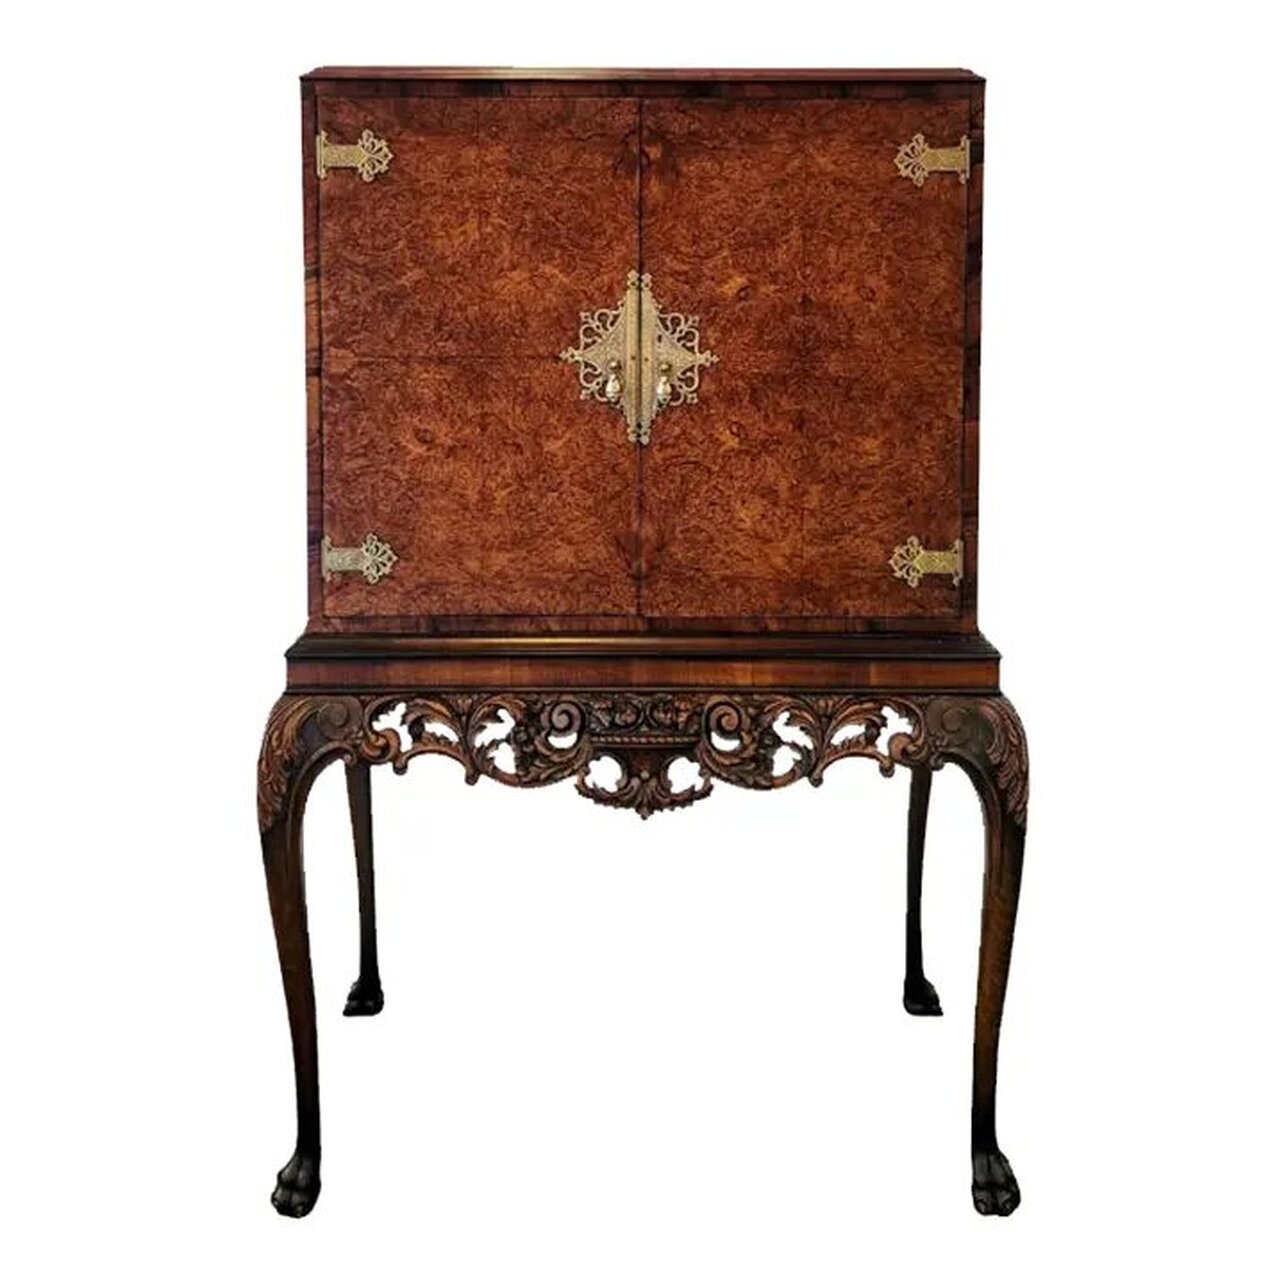 Early 20th century Queen Anne style cocktail cabinet on stand by Hille of London.  The cabinet is constructed of burl English walnut with burr walnut veneer on the two front doors.  The top is flat, allowing for use as a storage shelf.  The doors are embellished with etched brass strap hinges, escutcheons, and teardrop pulls.  The interior of the drinks cabinet is lined with sycamore wood, features a mirrored back and base, two glass shelves, and a mirrored slide-out prep station.  The mirror on the bottom may be removed for cleaning the wood base when needed.  The two glass shelves are removable.  The stand's apron is embellished with neoclassic style carvings of scrolls, swags, acanthus leaves, and a basket of flowers at the center.  The cabriole legs are embellished with carvings of acanthus leaves on the knees. The legs end in hairy paw and claw feet.  The carvings are well-done and finely detailed.  The drinks cabinet will complement interiors featuring elements of Georgian, Queen Anne, Chippendale, Chinoiserie, and Baroque.  Cocktail cabinet is in stock now at India Street Antiques in San Diego and is ready for pick-up, delivery, and shipping.